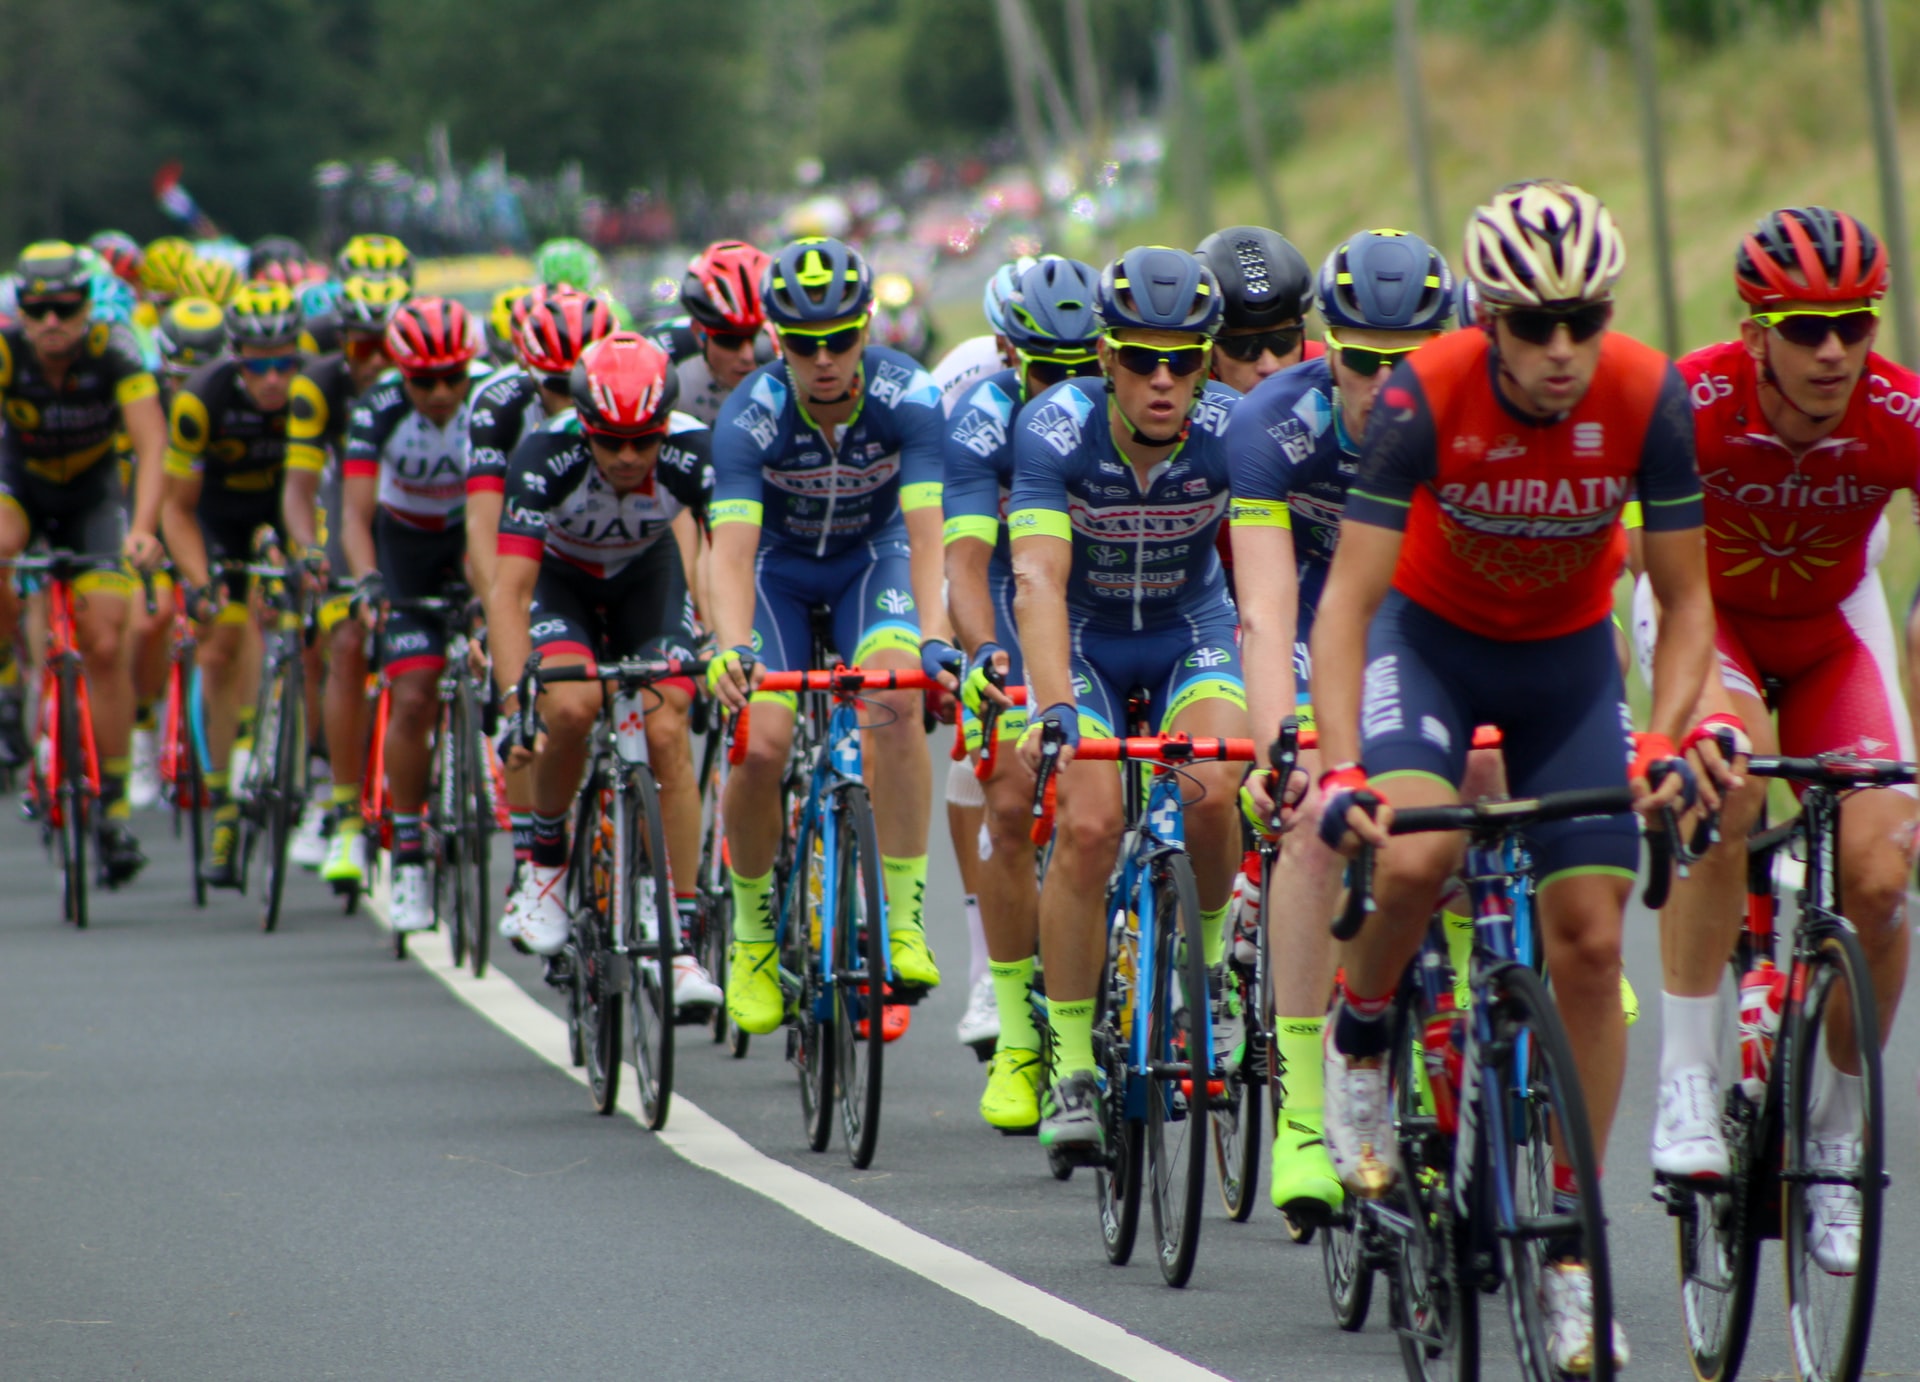 A very large group of male cyclists, racing bicycles along a roadway.